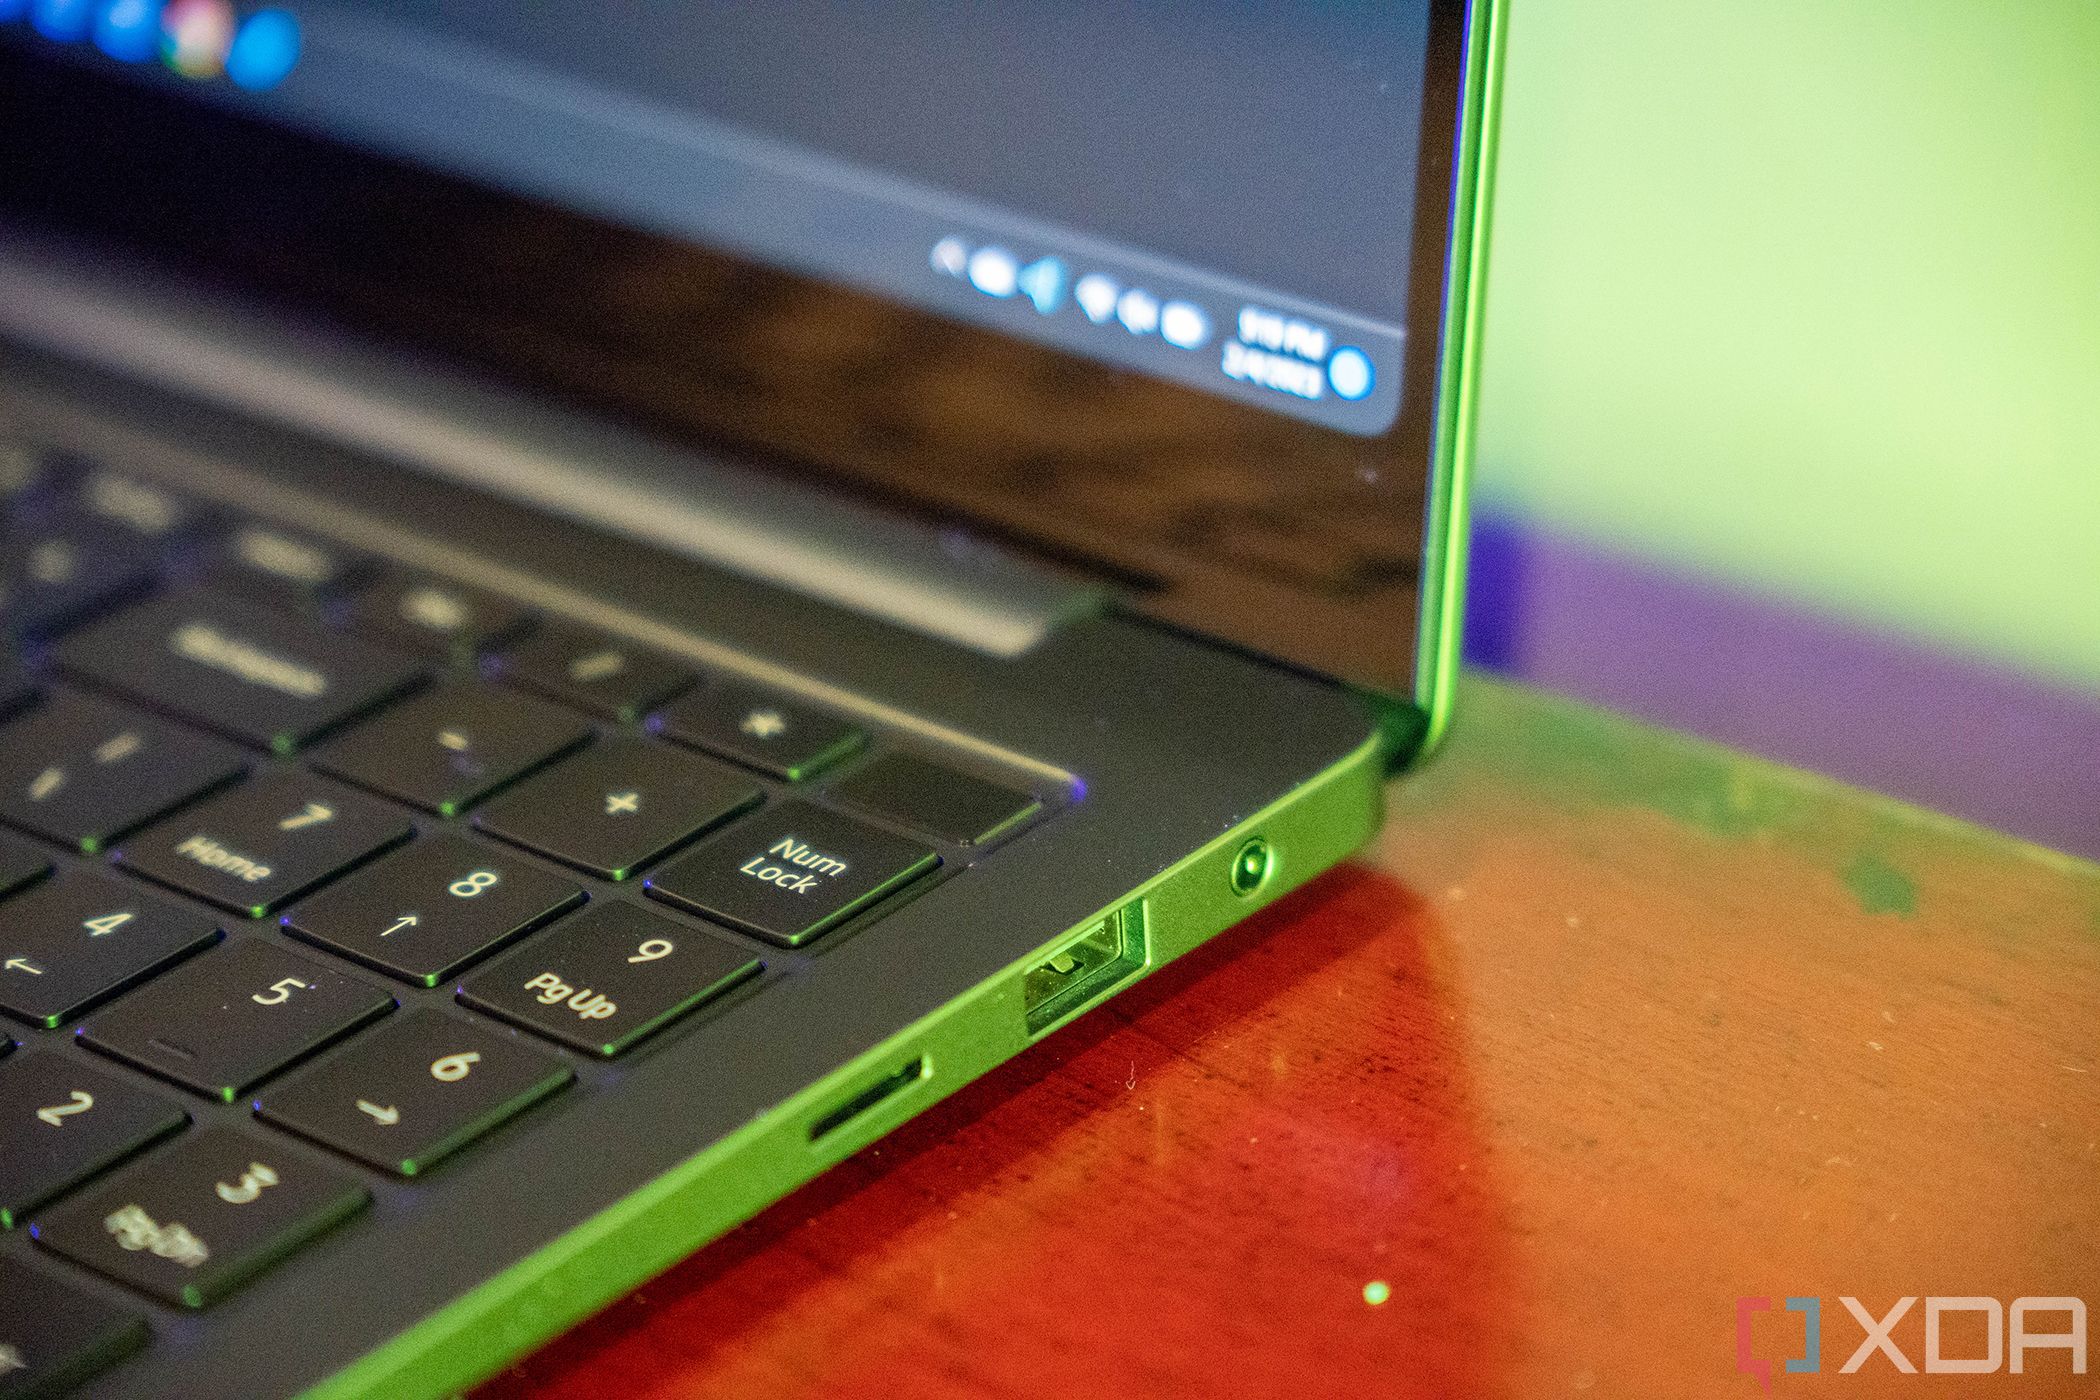 Angled view of laptop with USB Type-A port, 3.5mm audio, and microSD